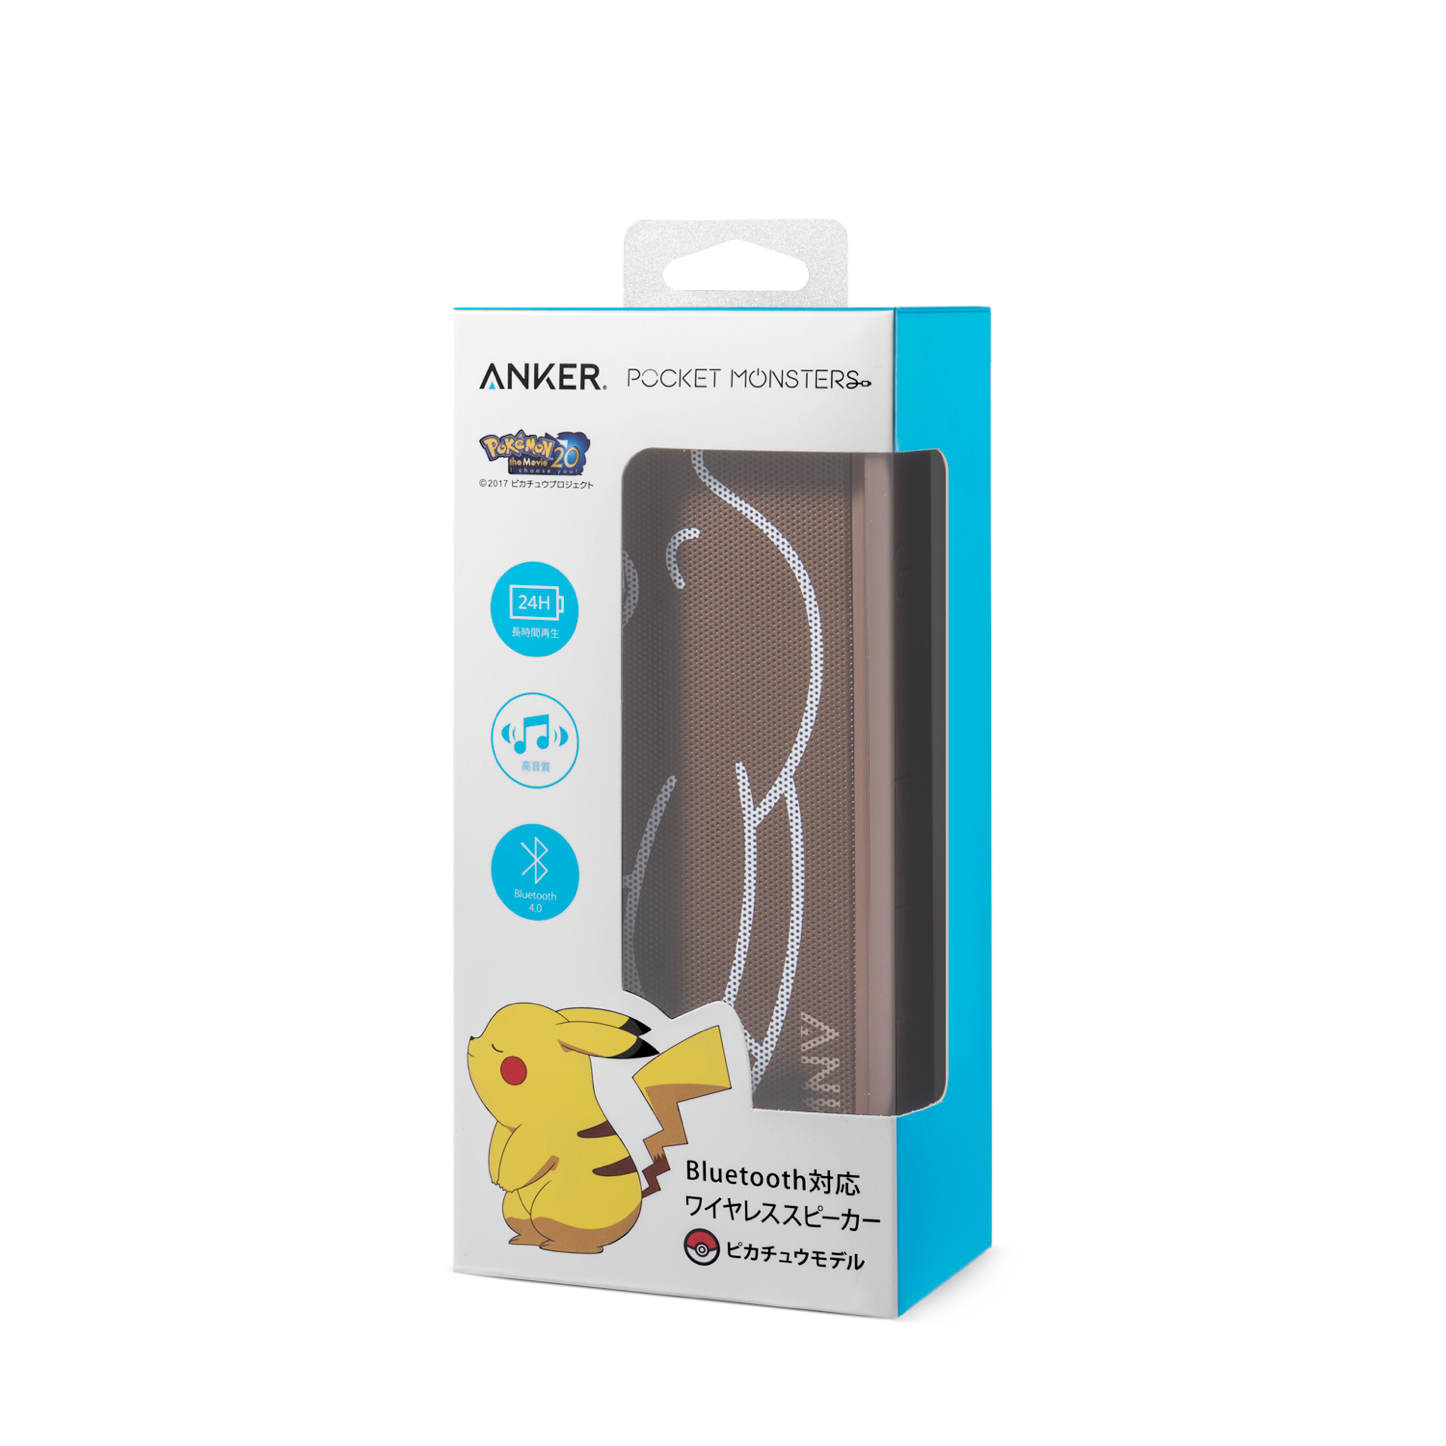 Anker-Pokemon-Mobile-Accessories-16.png